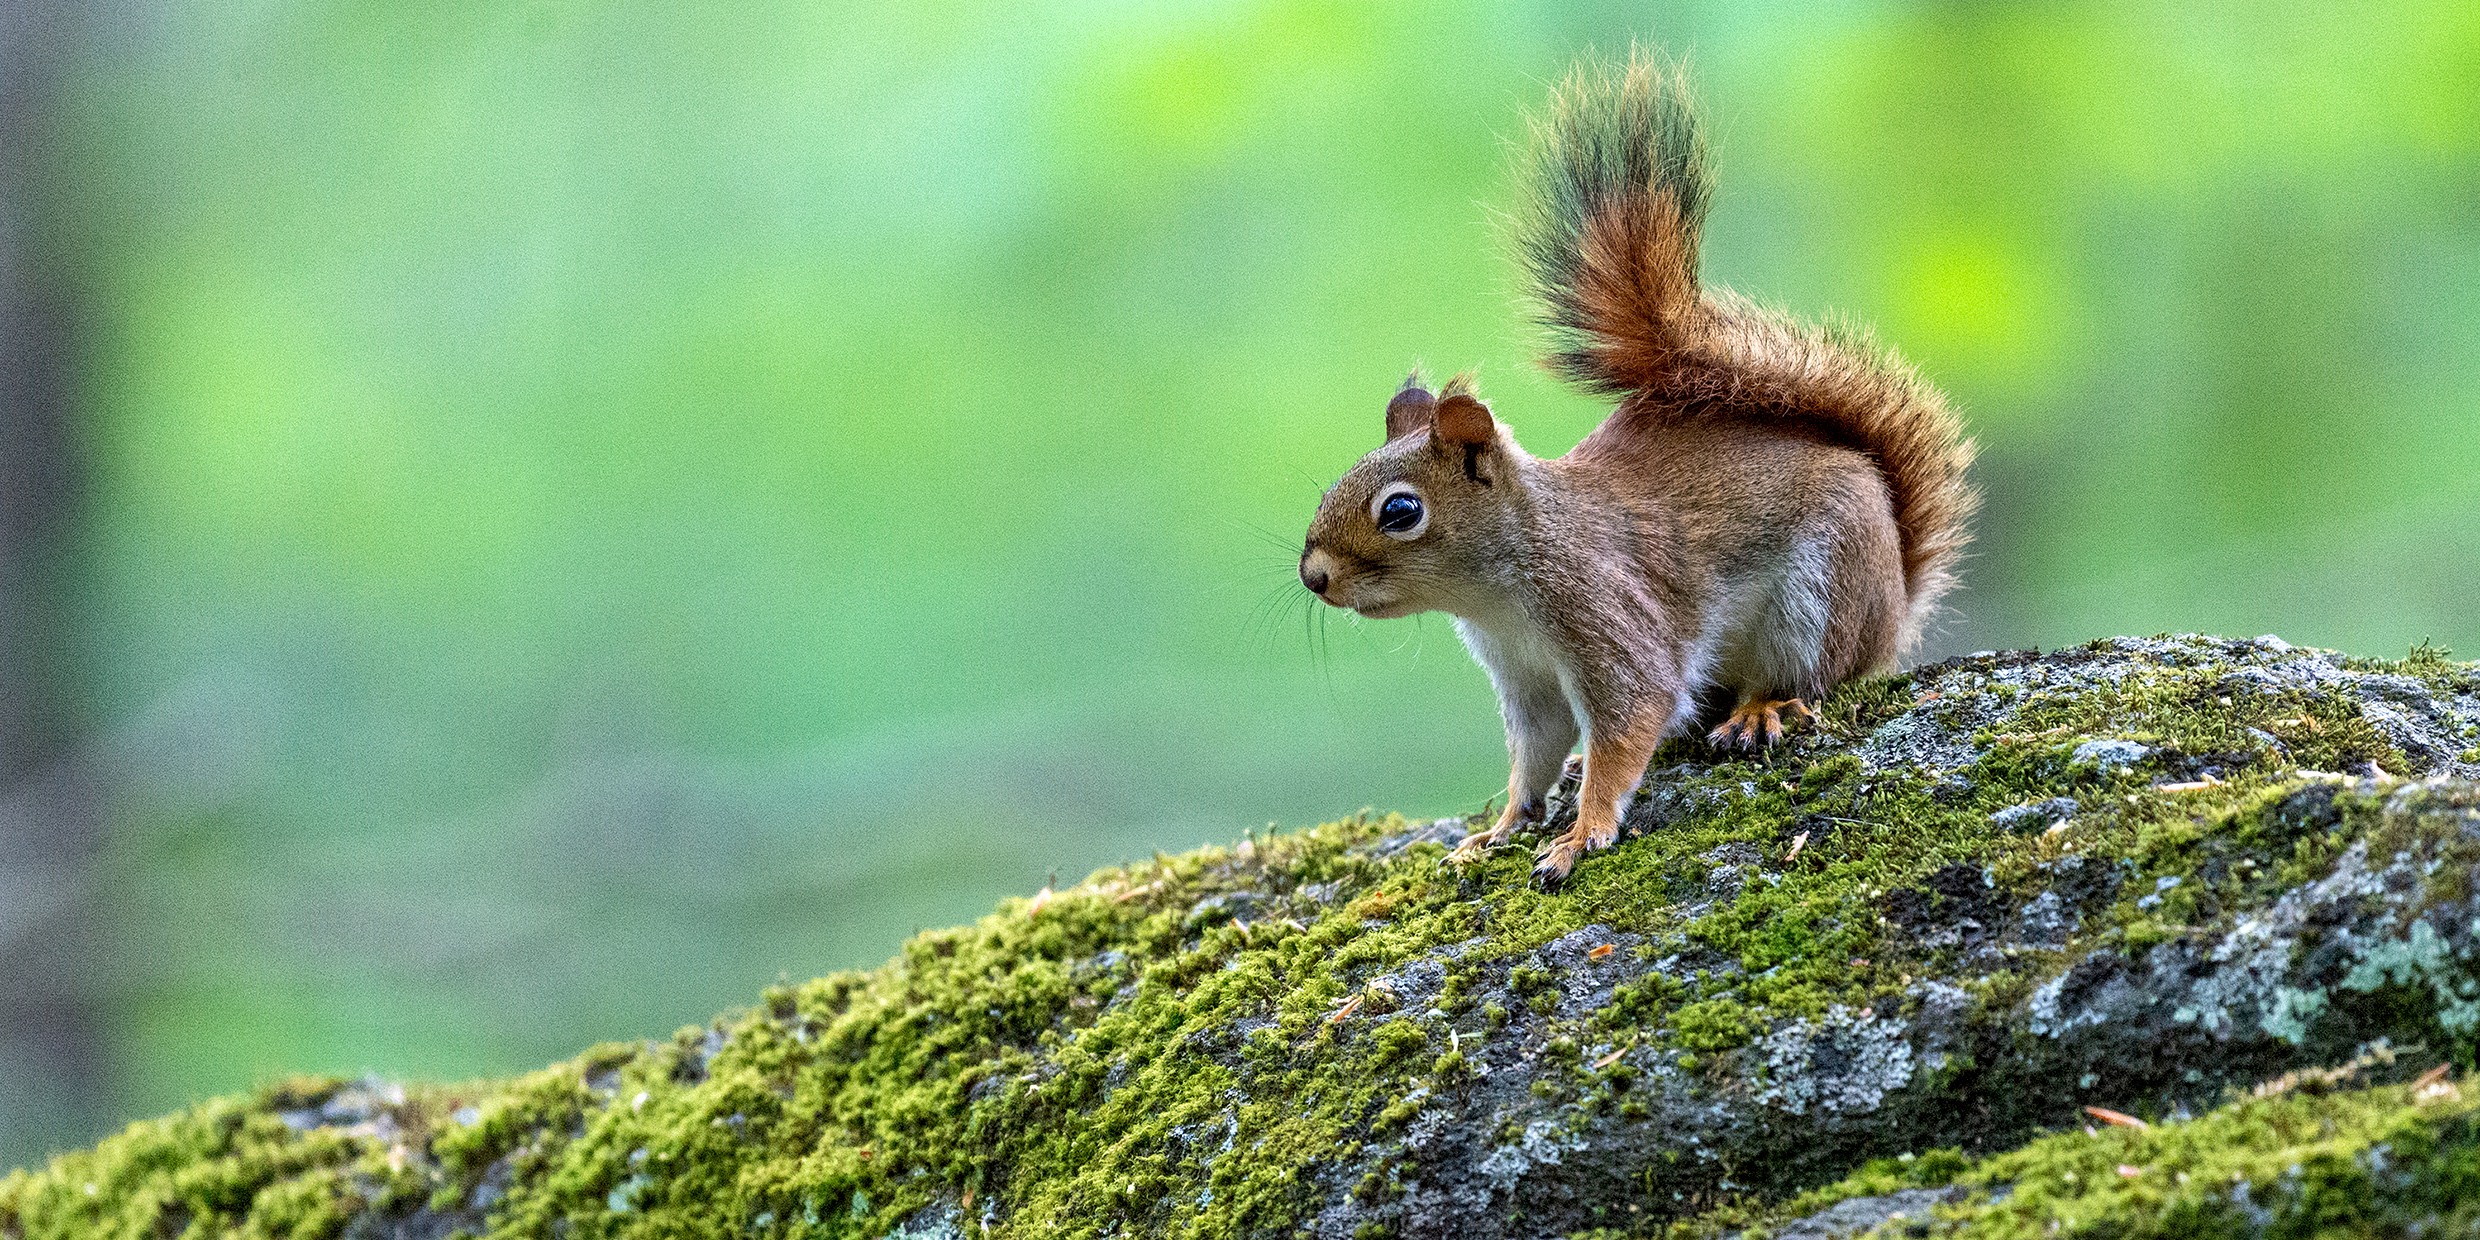 Image of a red squirrel on a mossy rock